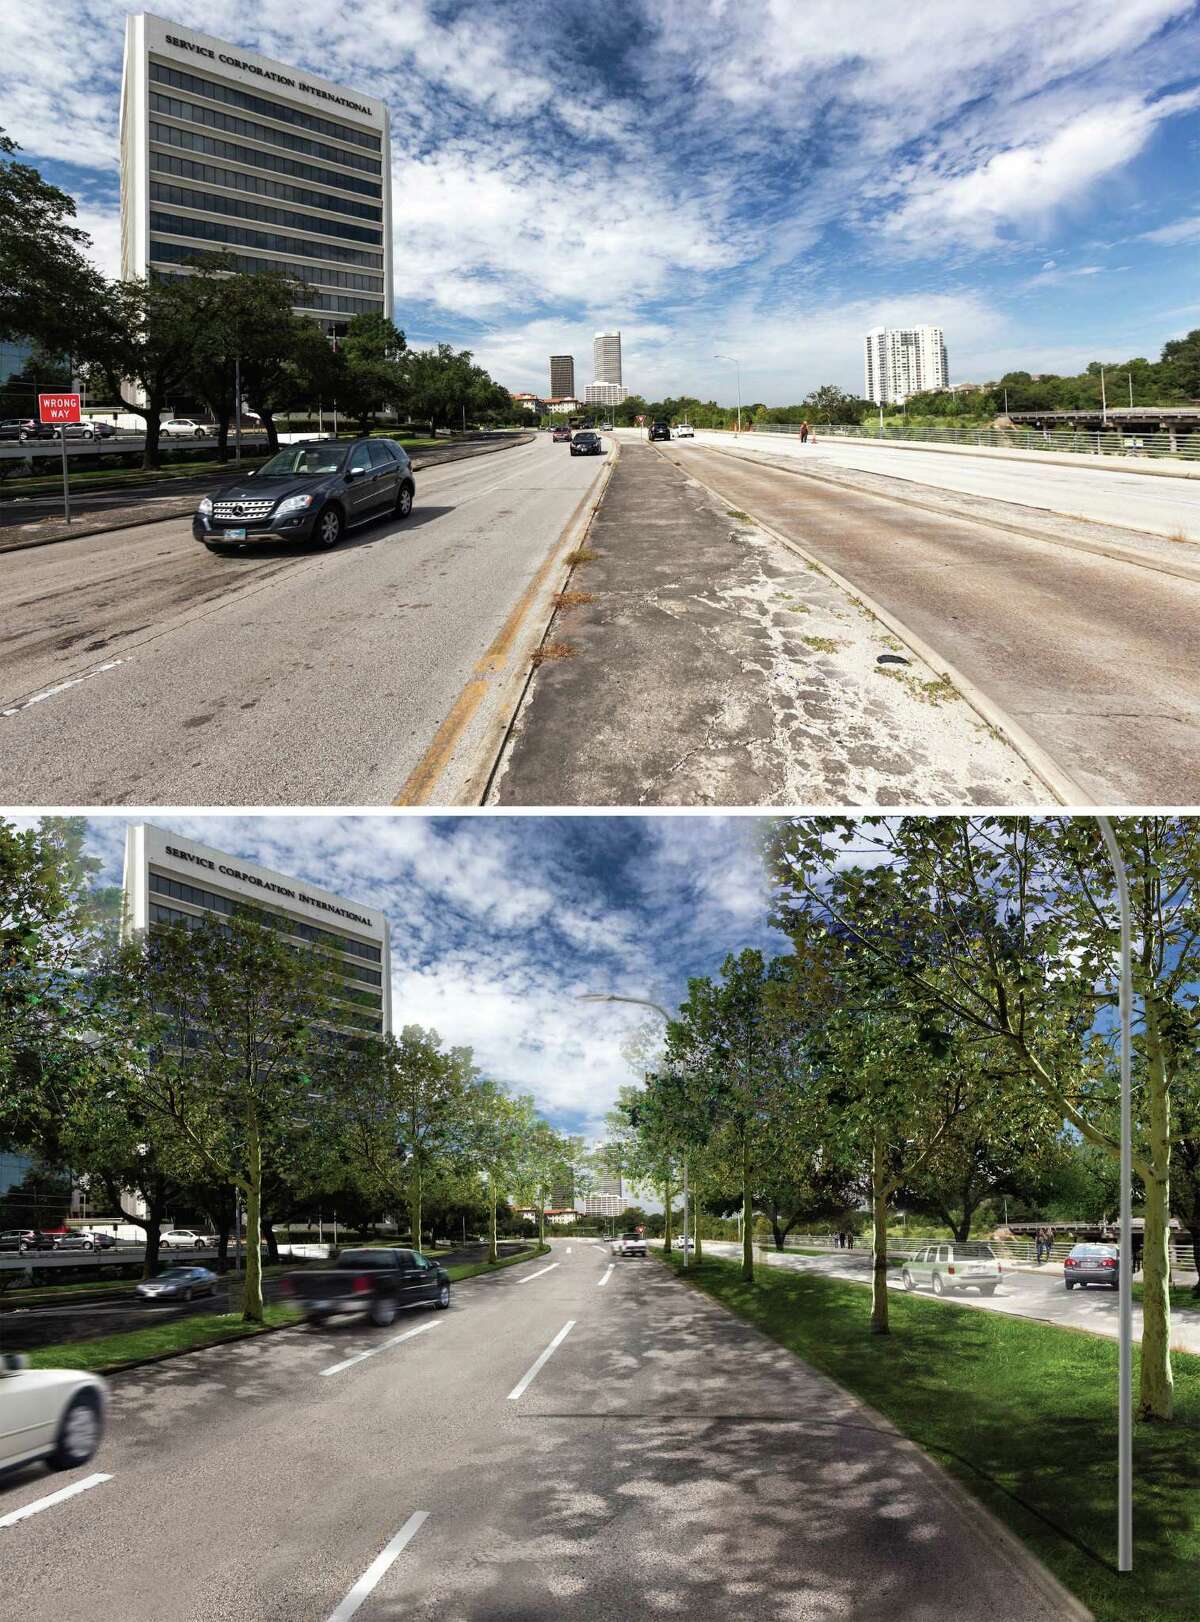 Before (top) and after renderings of Allen Parkway looking west at Taft Street. The City of Houston and Downtown Houston Management District have announced a $10 million renovation to Allen Parkway that will include shifting the lanes to make the current westbound lane a feeder lane to increase parking along the Buffalo Bayou Trail system. Rendering by SWA